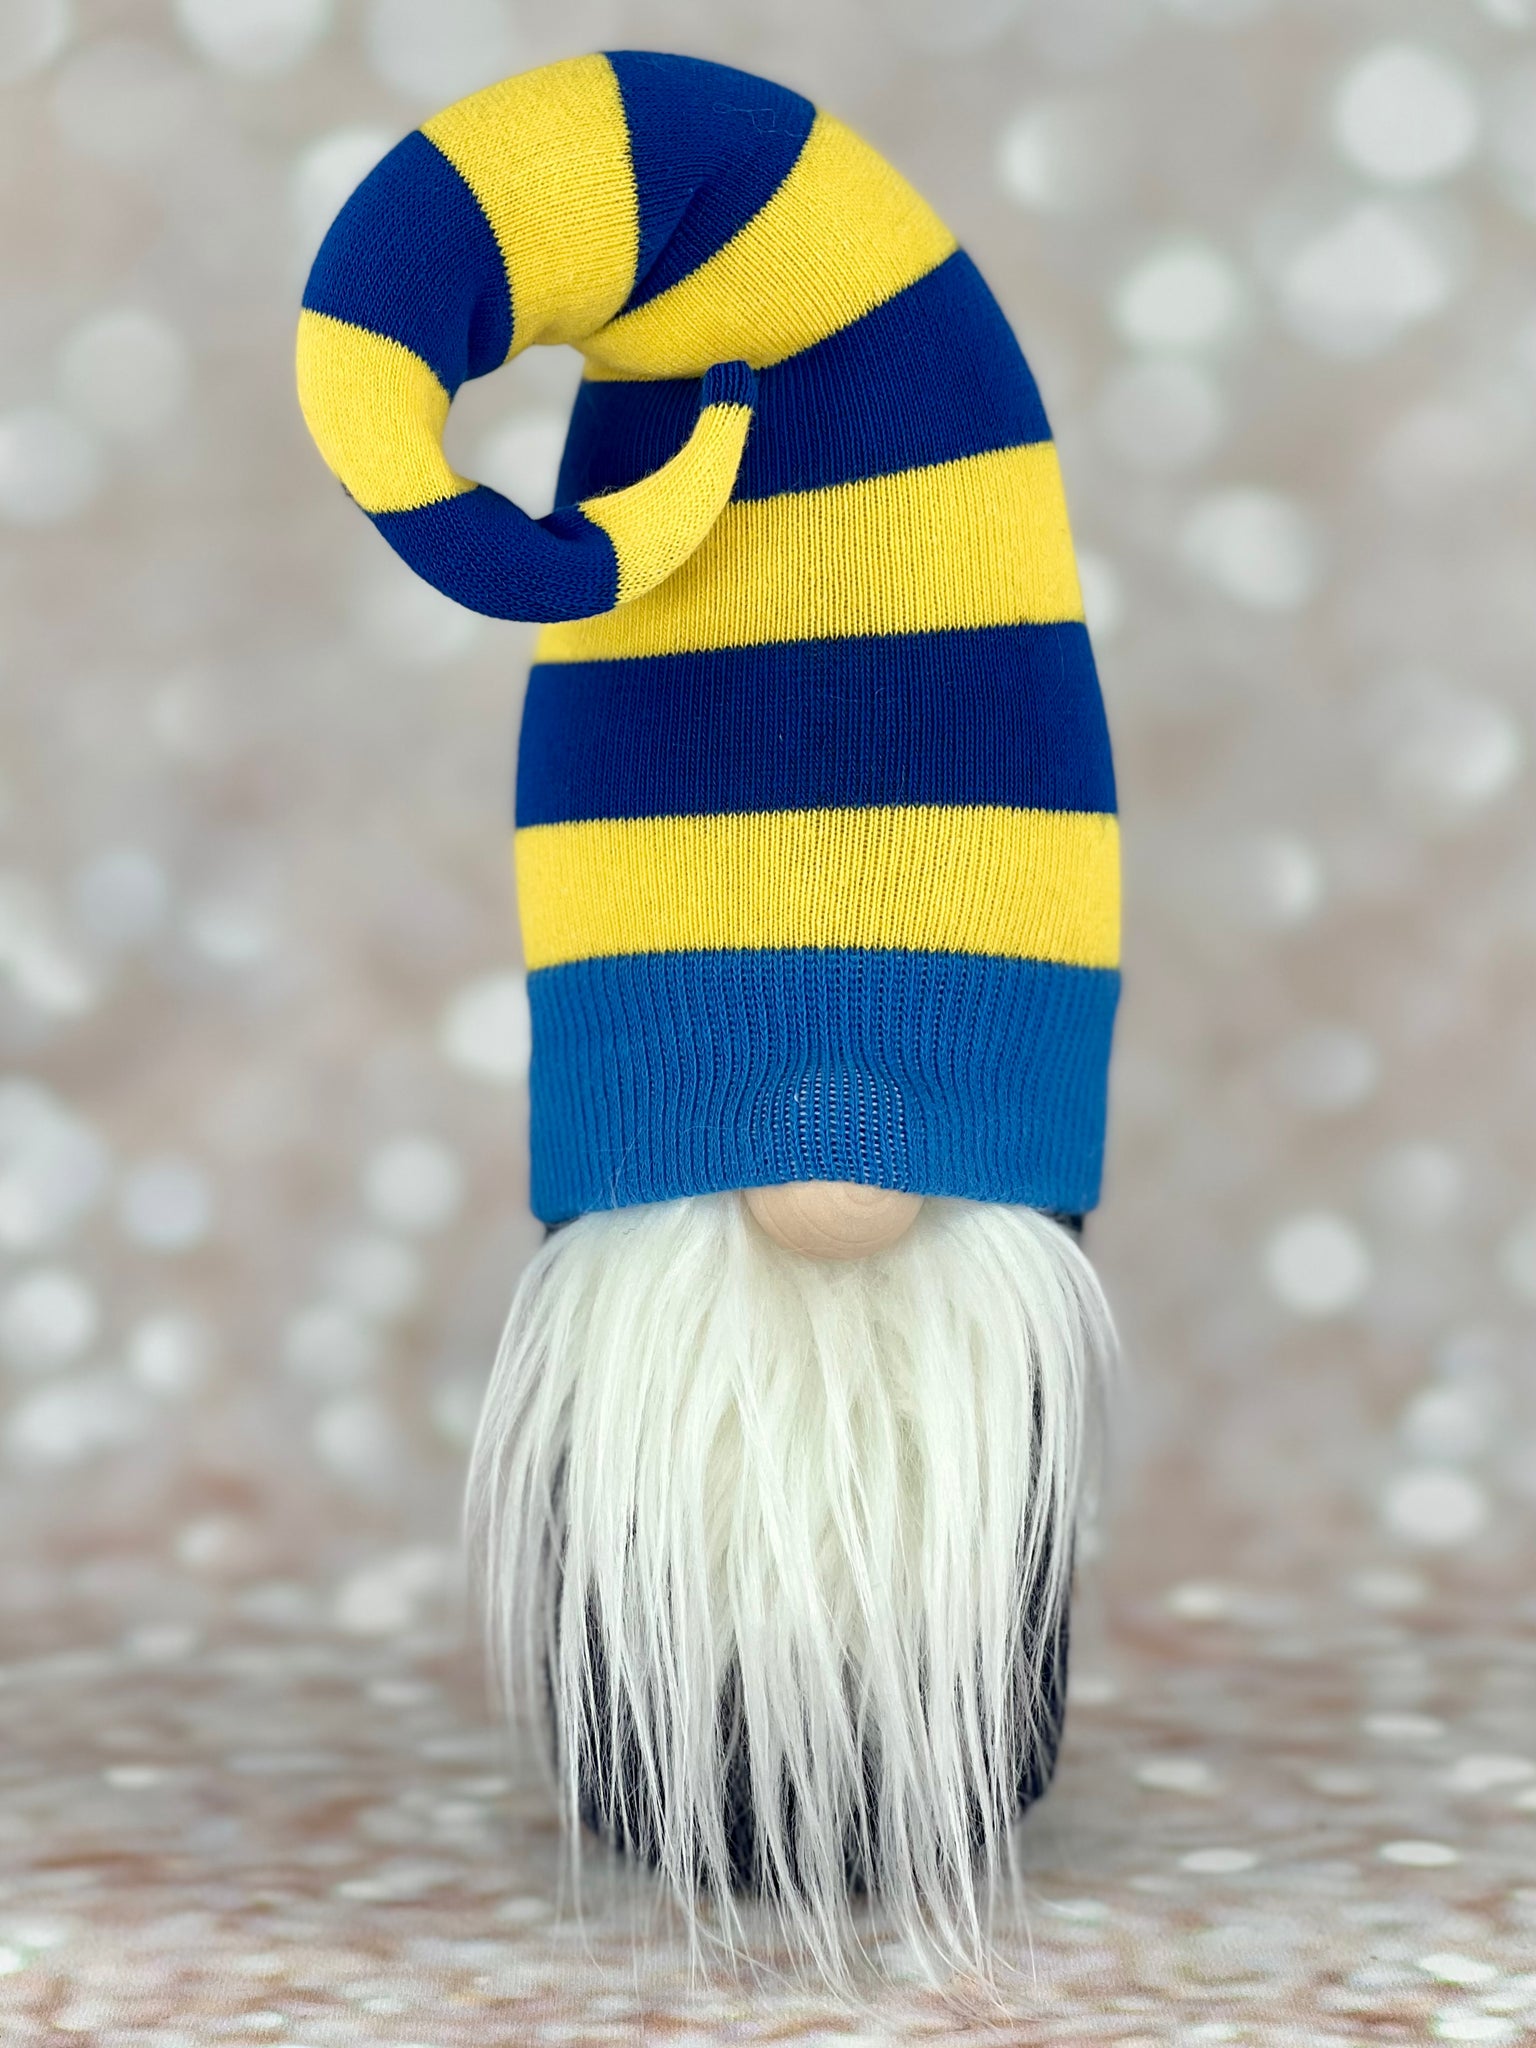 Blue and Yellow School/Team Colors Gnome